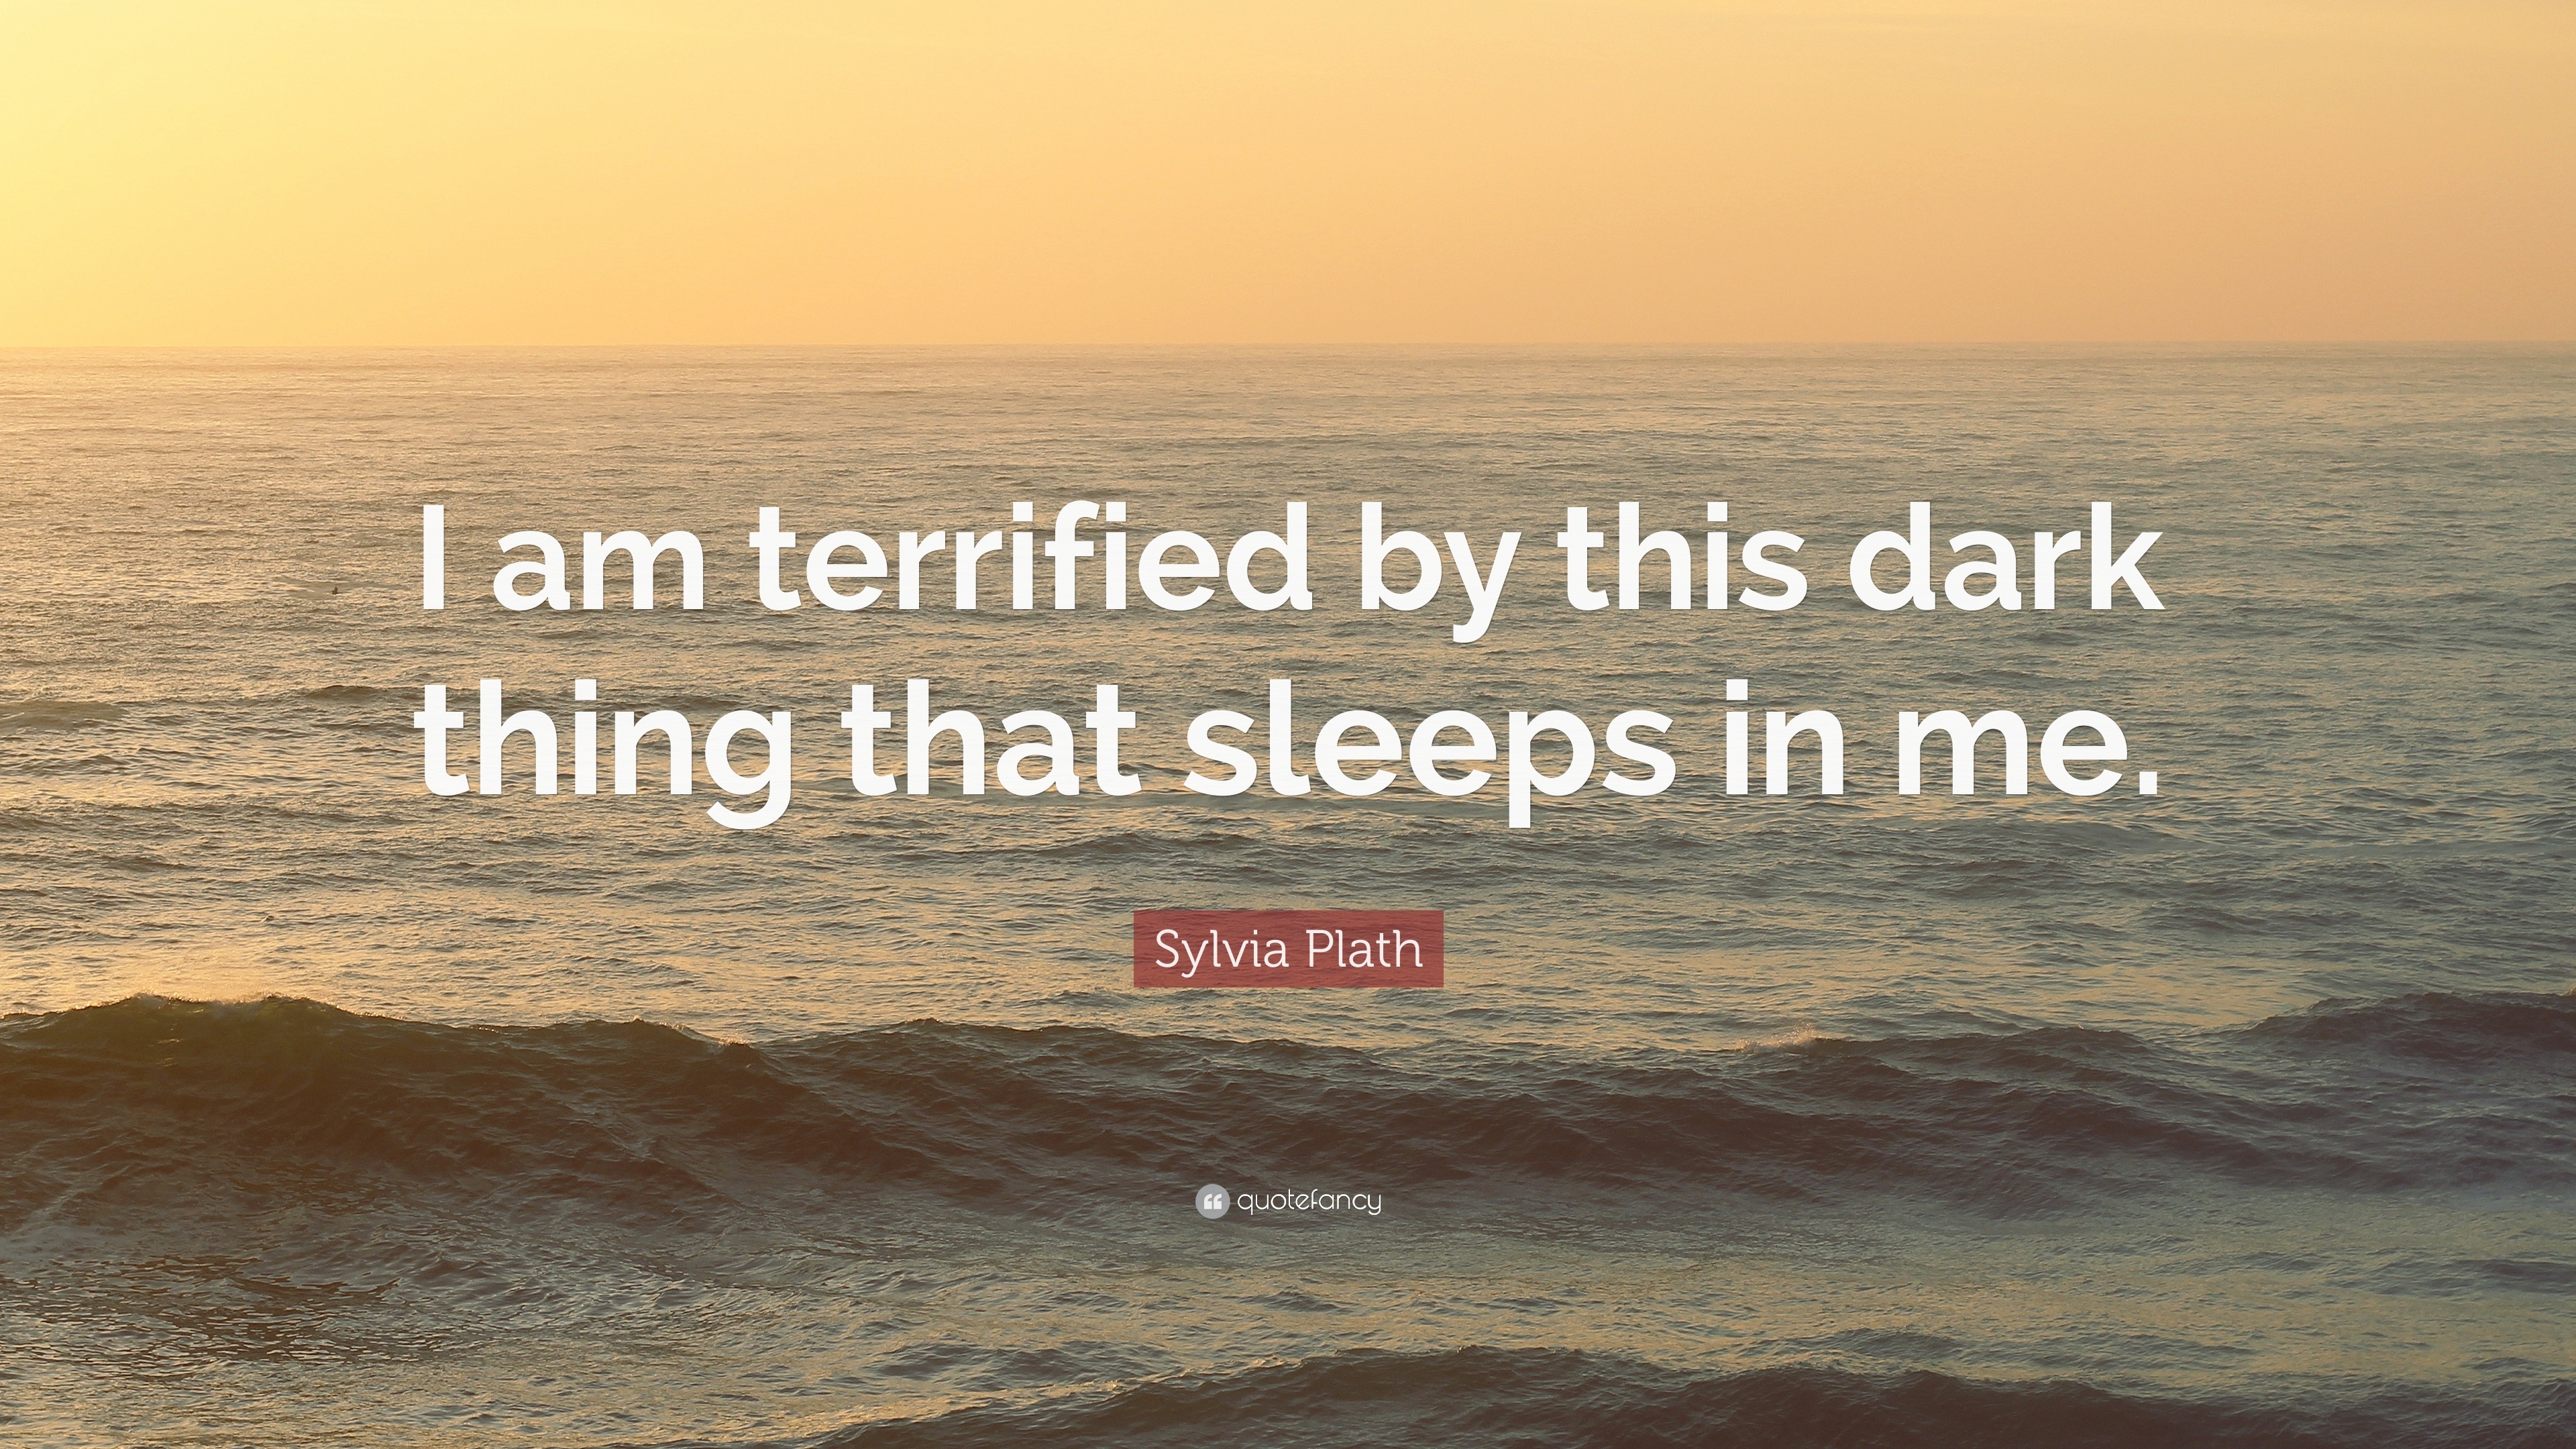 Sylvia Plath Quote “i Am Terrified By This Dark Thing That Sleeps In Me”